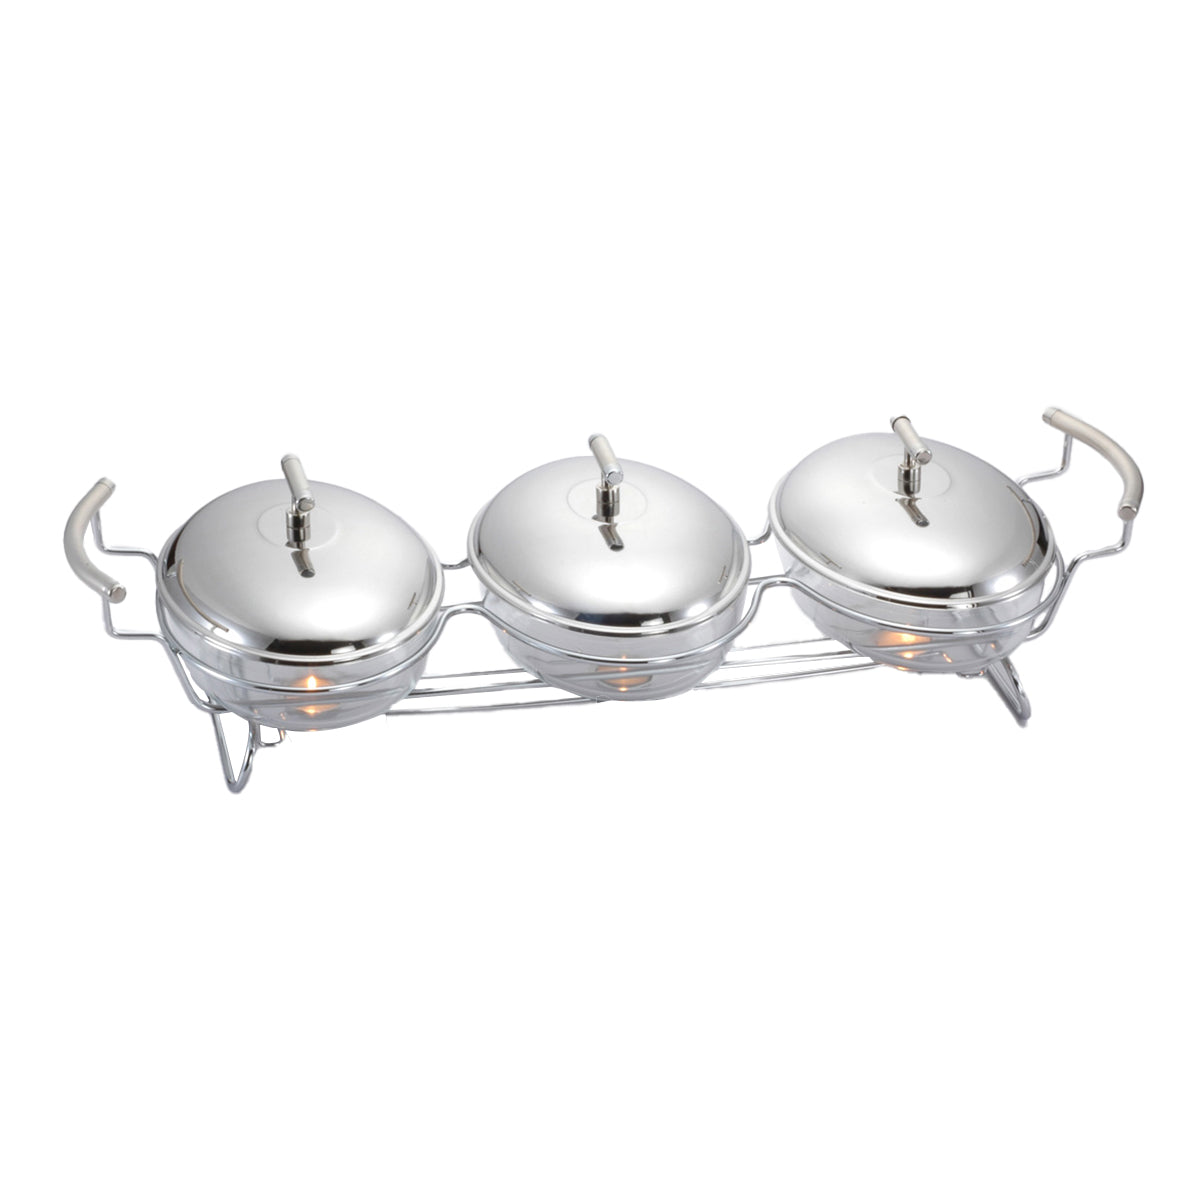 ﻿3 Oval Food Warmers with Three Candles -3x1.5 Lit. -Stainless Steel 18/10 & Tempered Glass